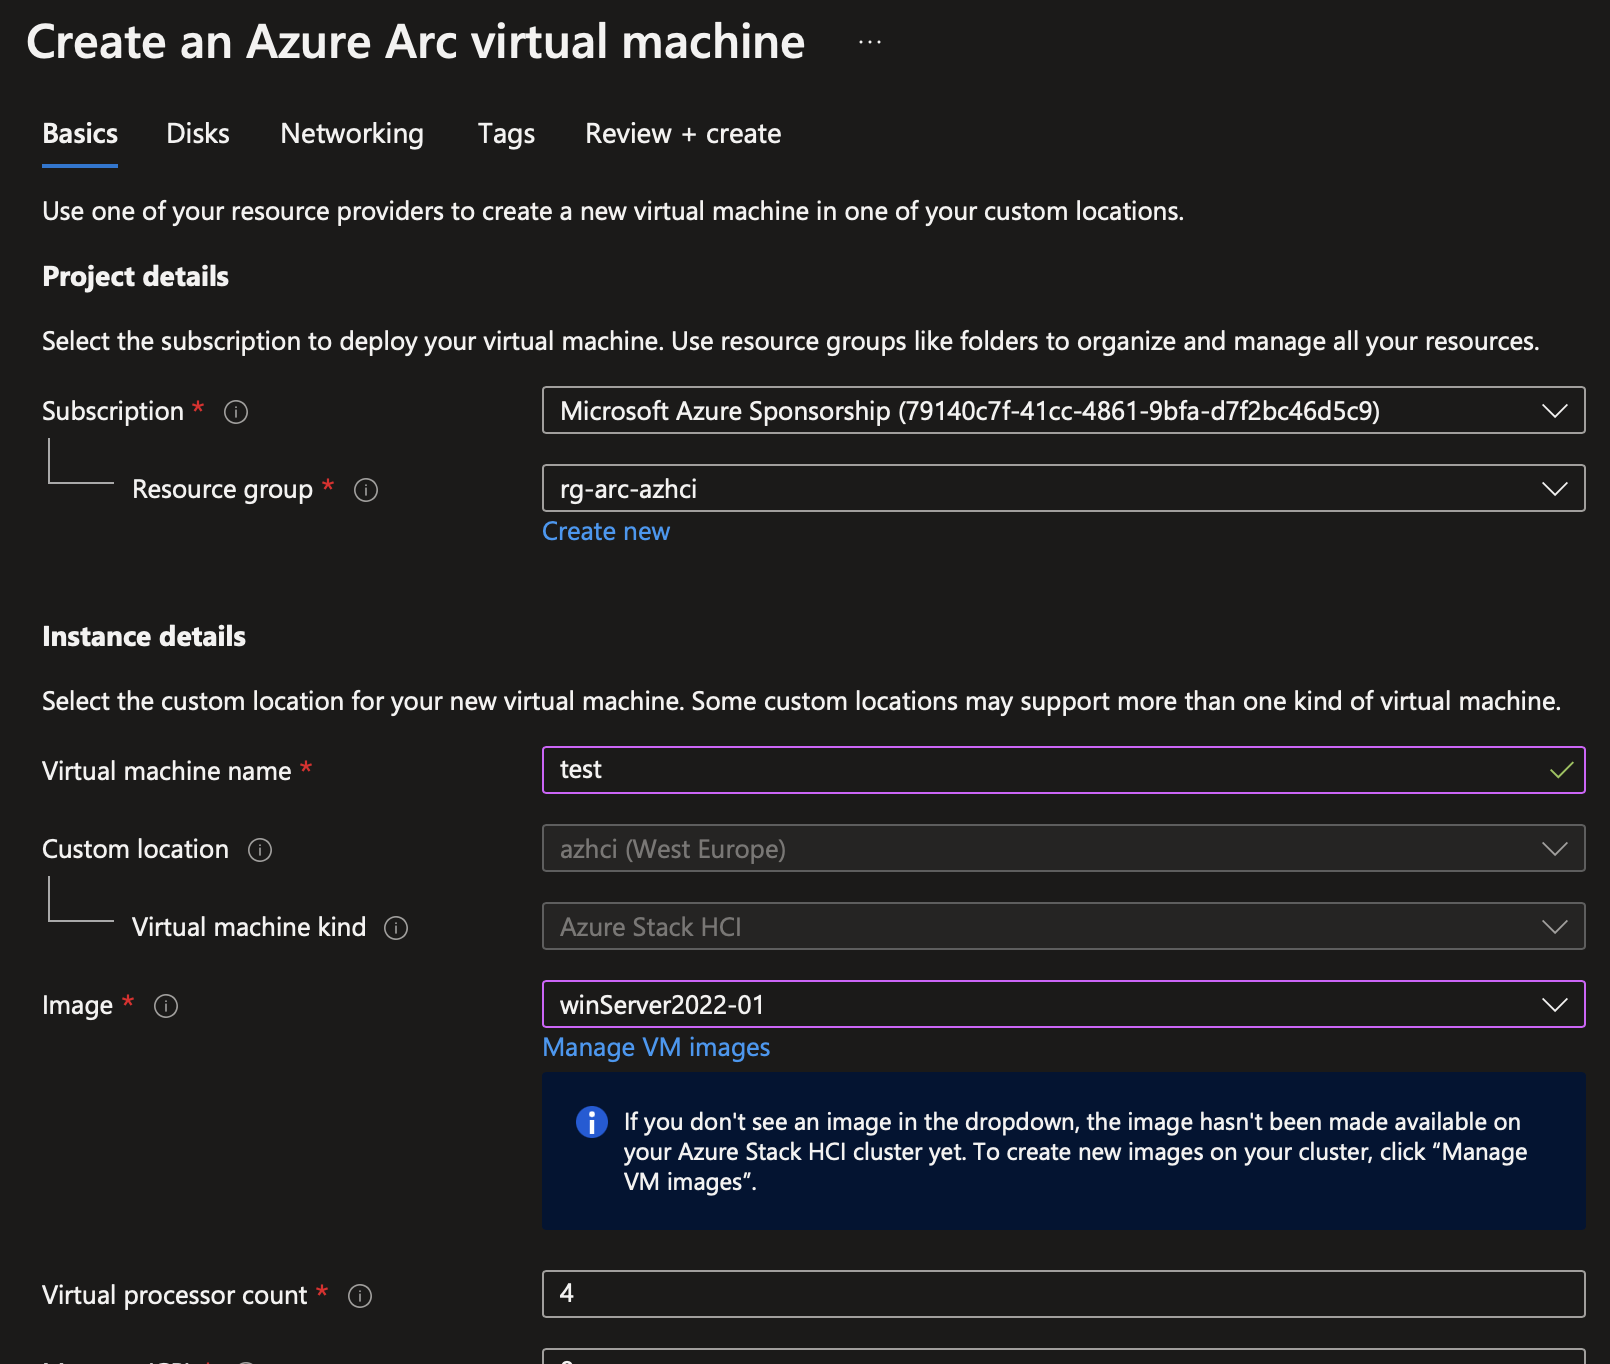 e custom location that is your Azure Stack HCI cluster, specify a VM name, image and size